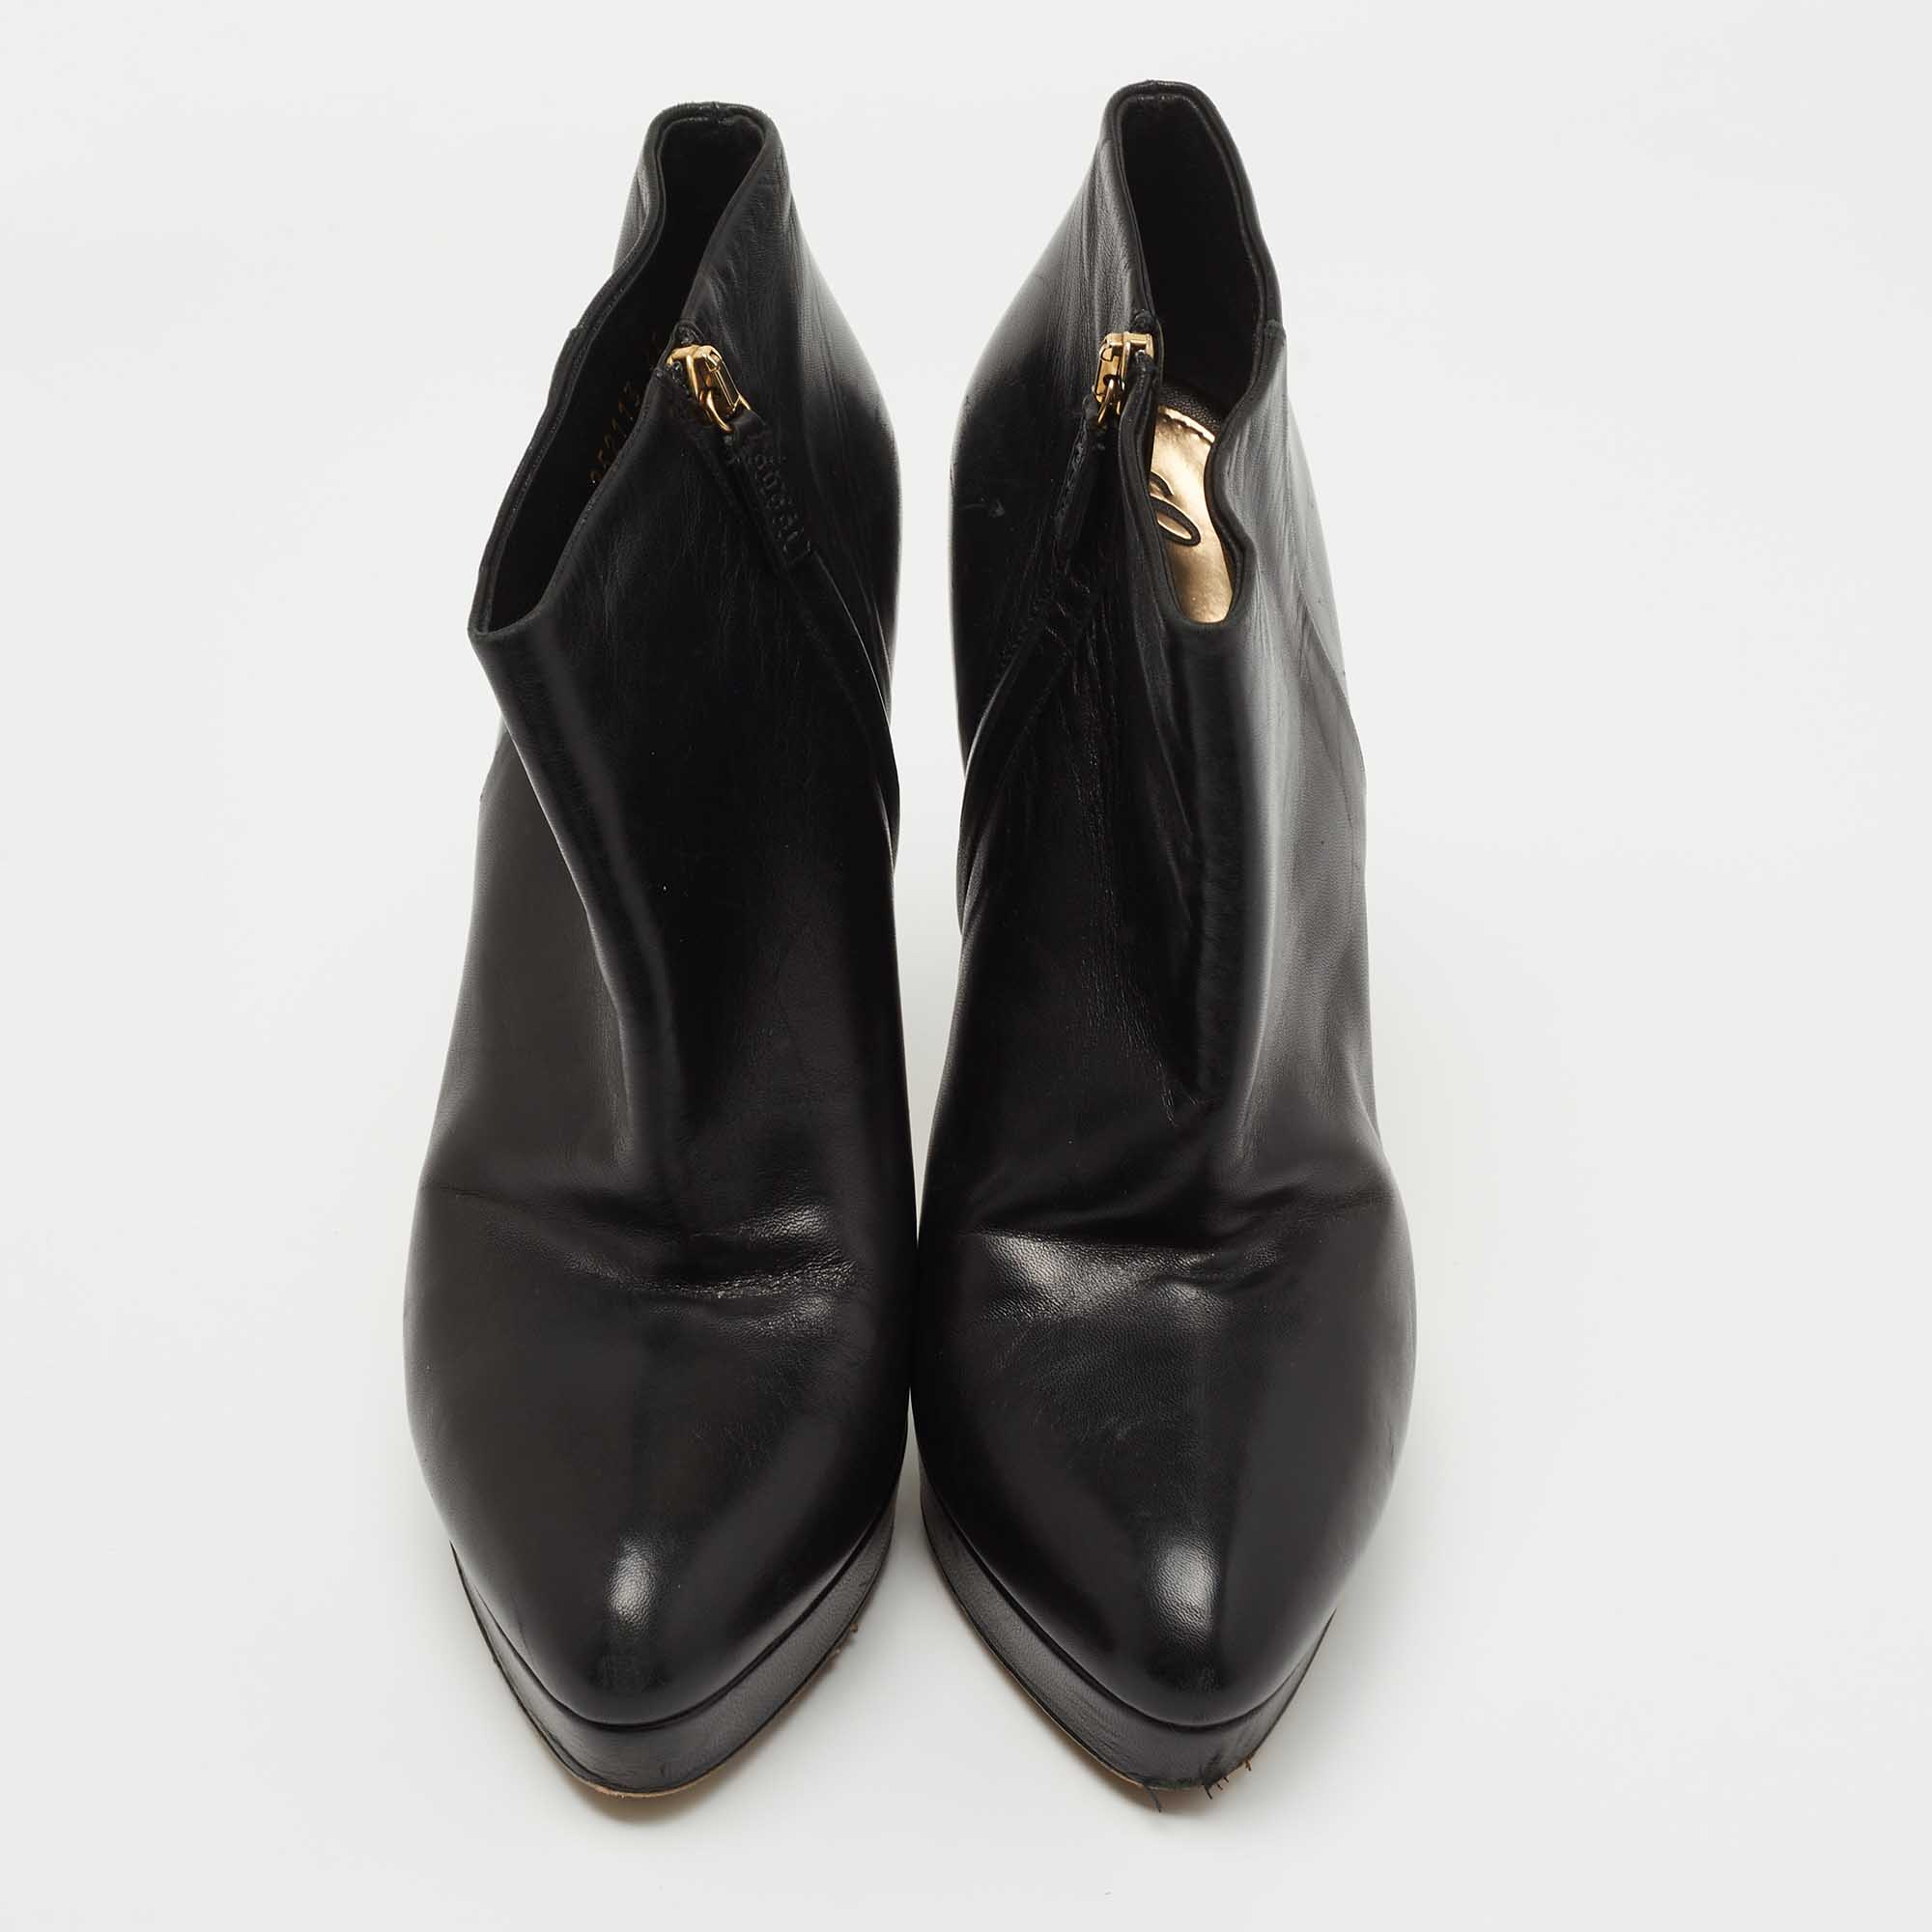 Gucci Black Leather Platform Ankle Booties Size 40